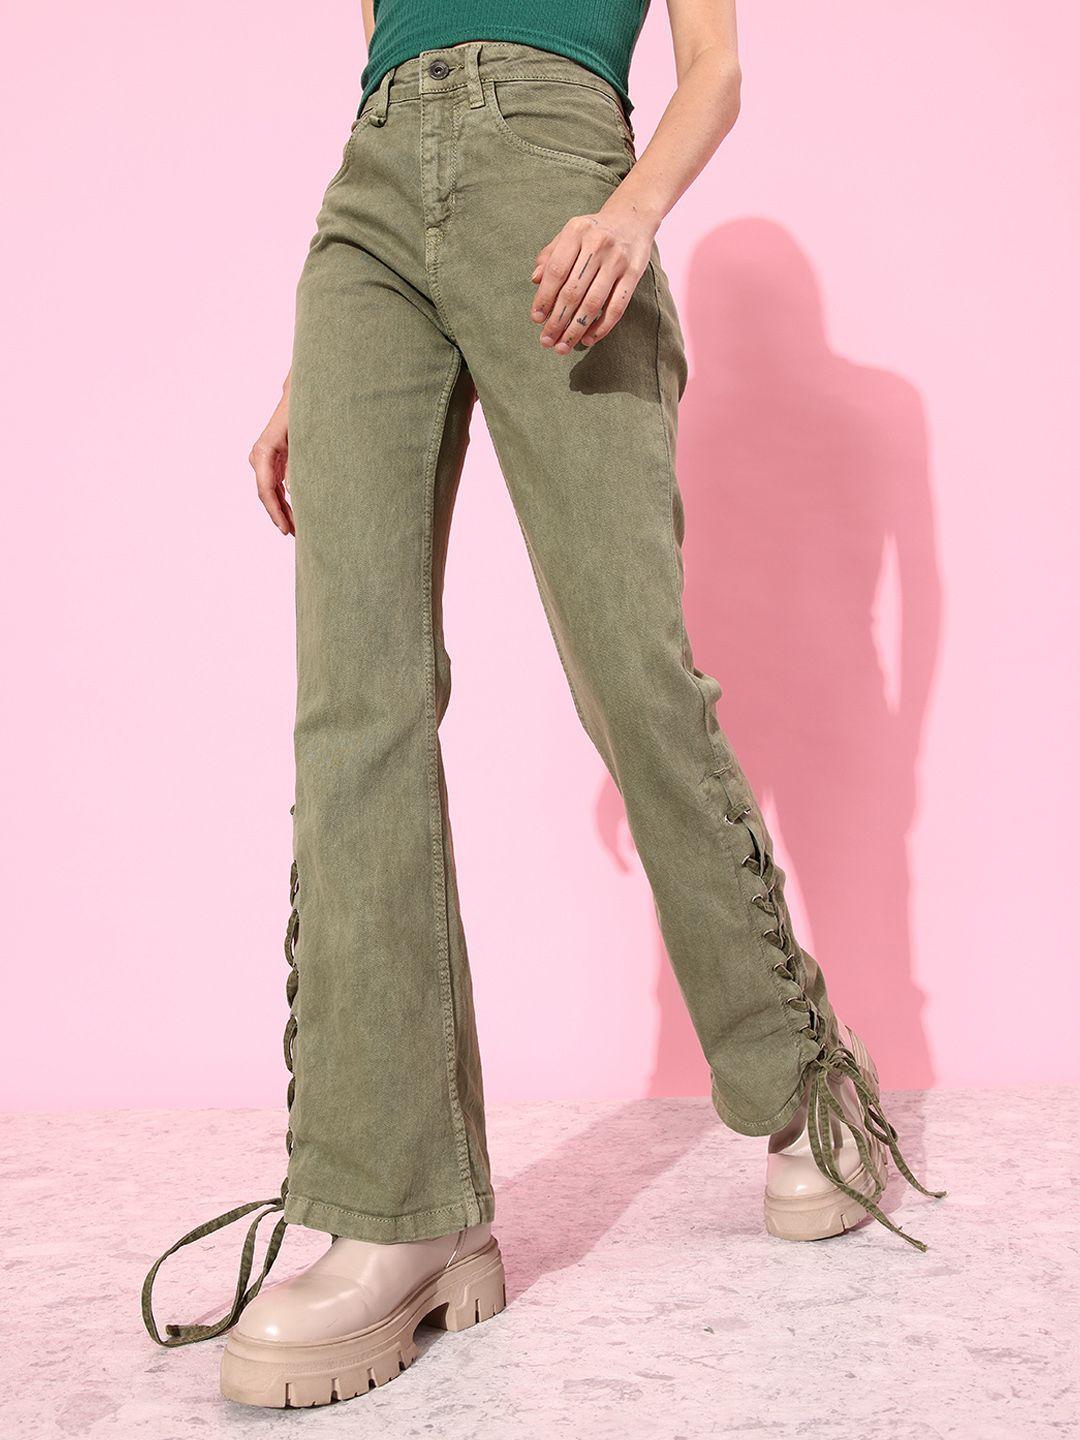 the roadster life co. women olive green rodeo bootcuts high-rise stretchable jeans